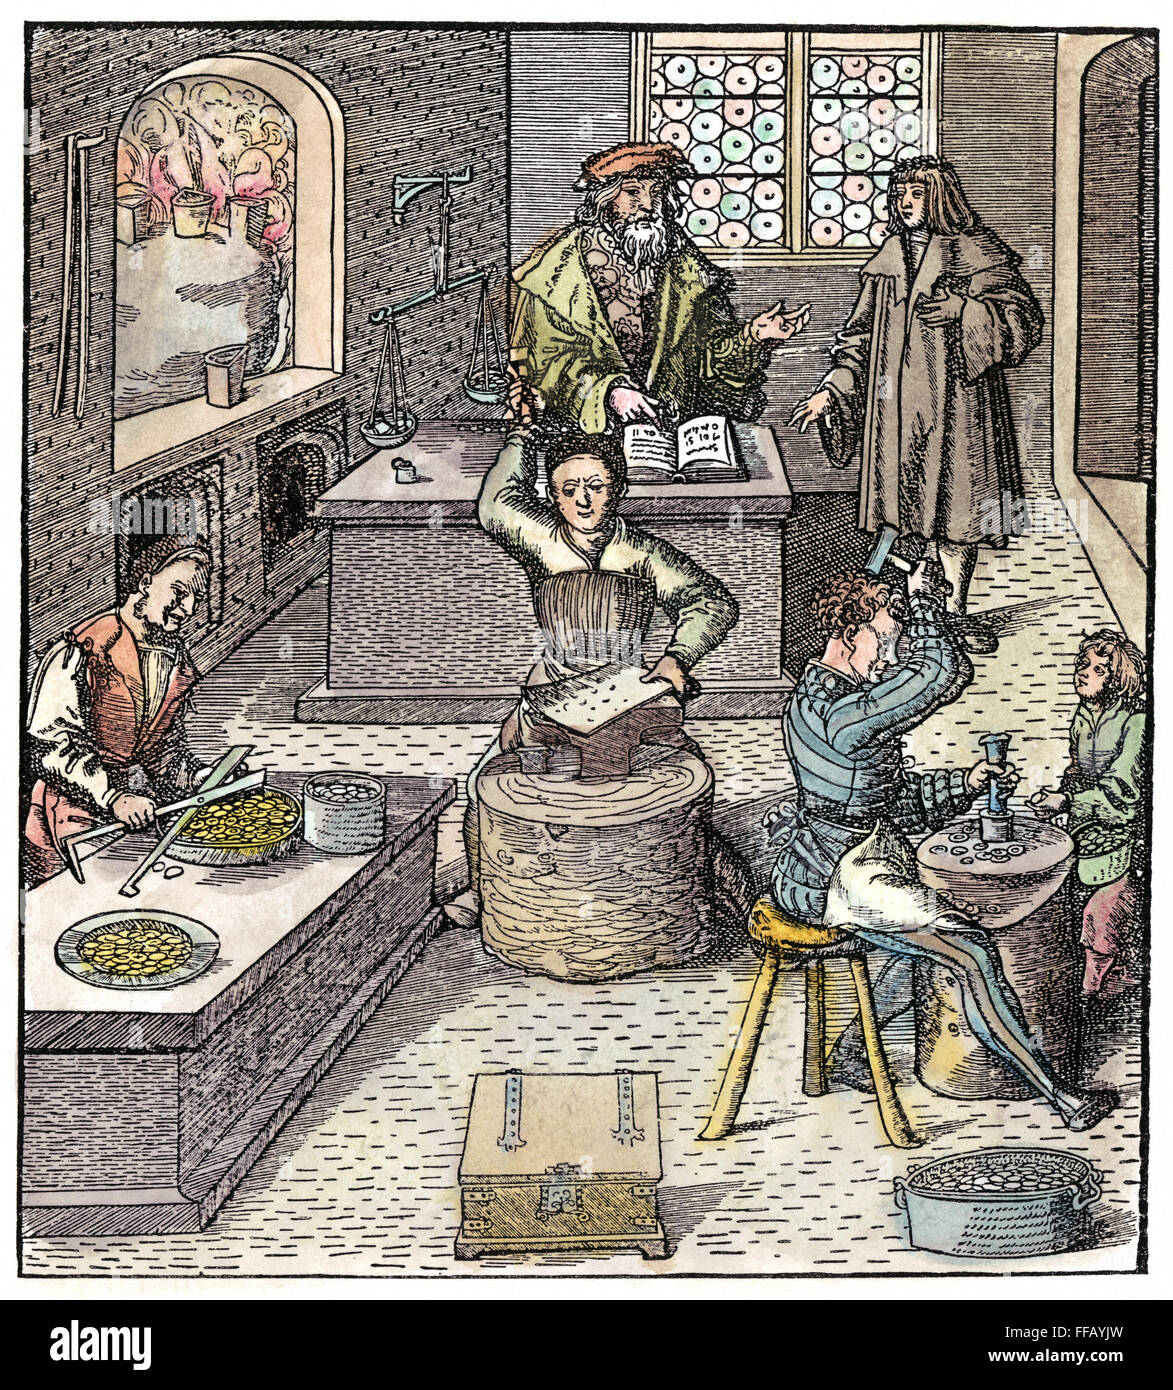 MINTING COINS, c1515. /nThe minting of coins. Woodcut, c1515, by Hans Burgkmair. Stock Photo